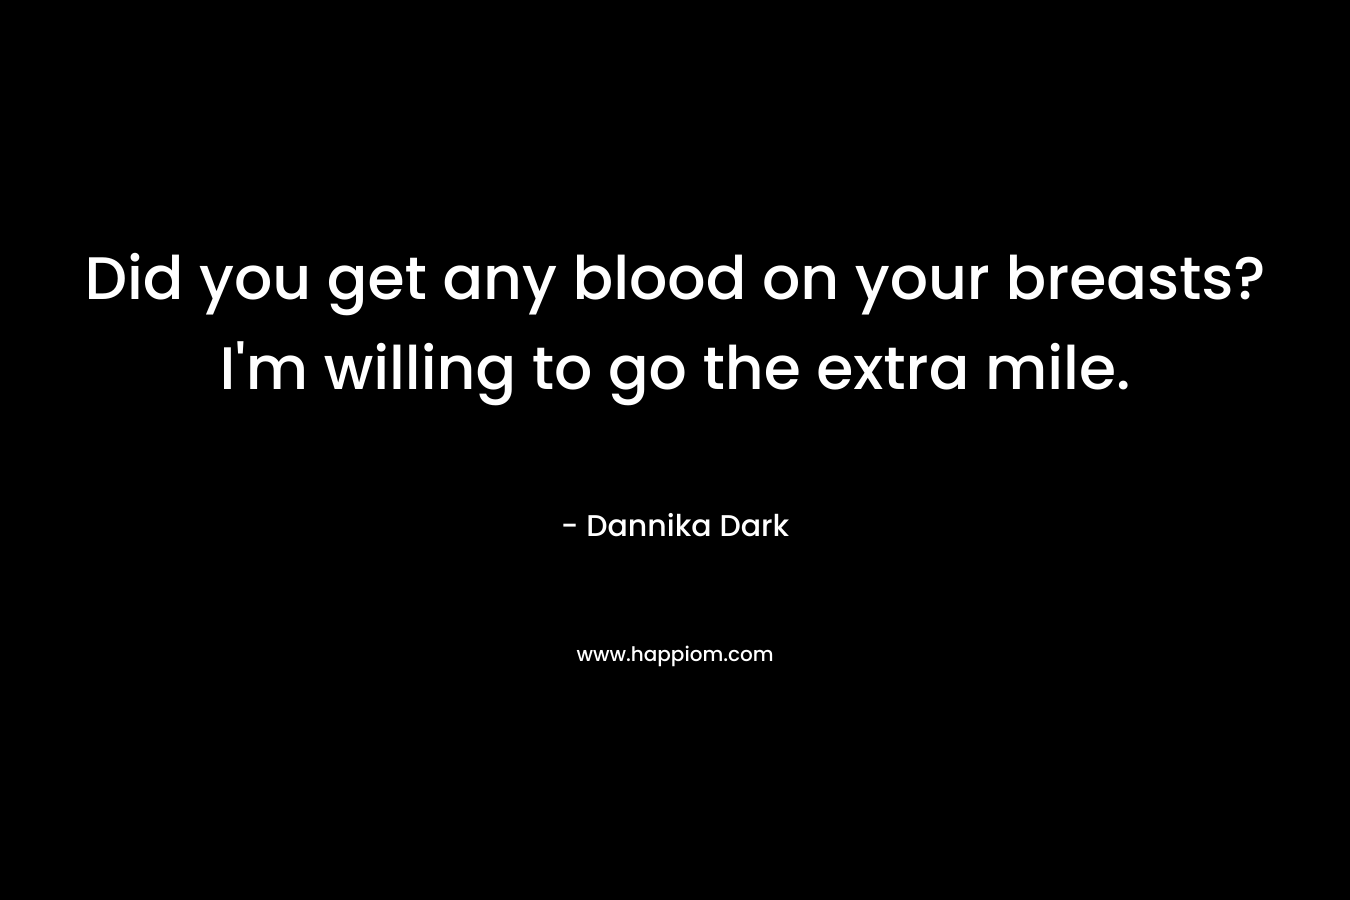 Did you get any blood on your breasts? I’m willing to go the extra mile. – Dannika Dark